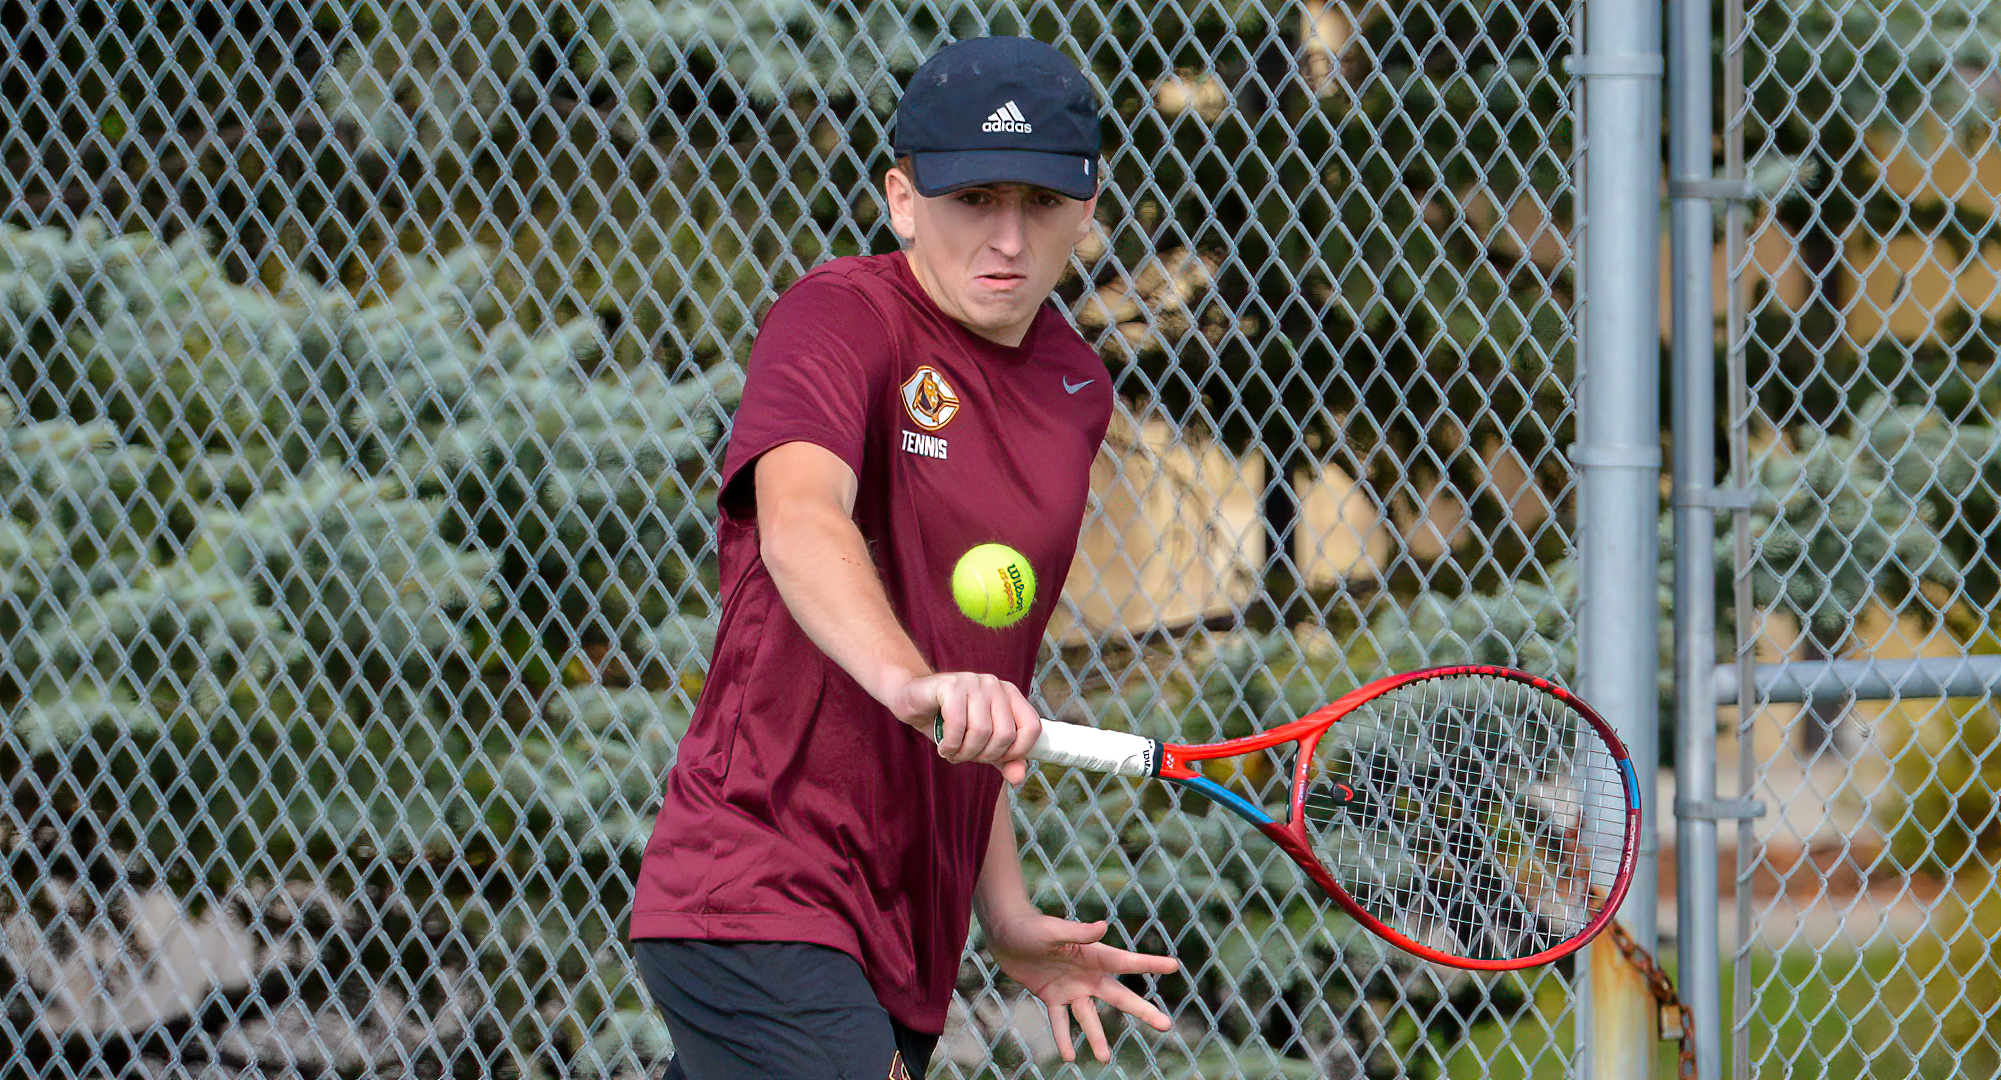 Freshman Isaac Maddock went 4-0 in his matches on the final day of the Cobbers' annual spring break training trip to Florida.